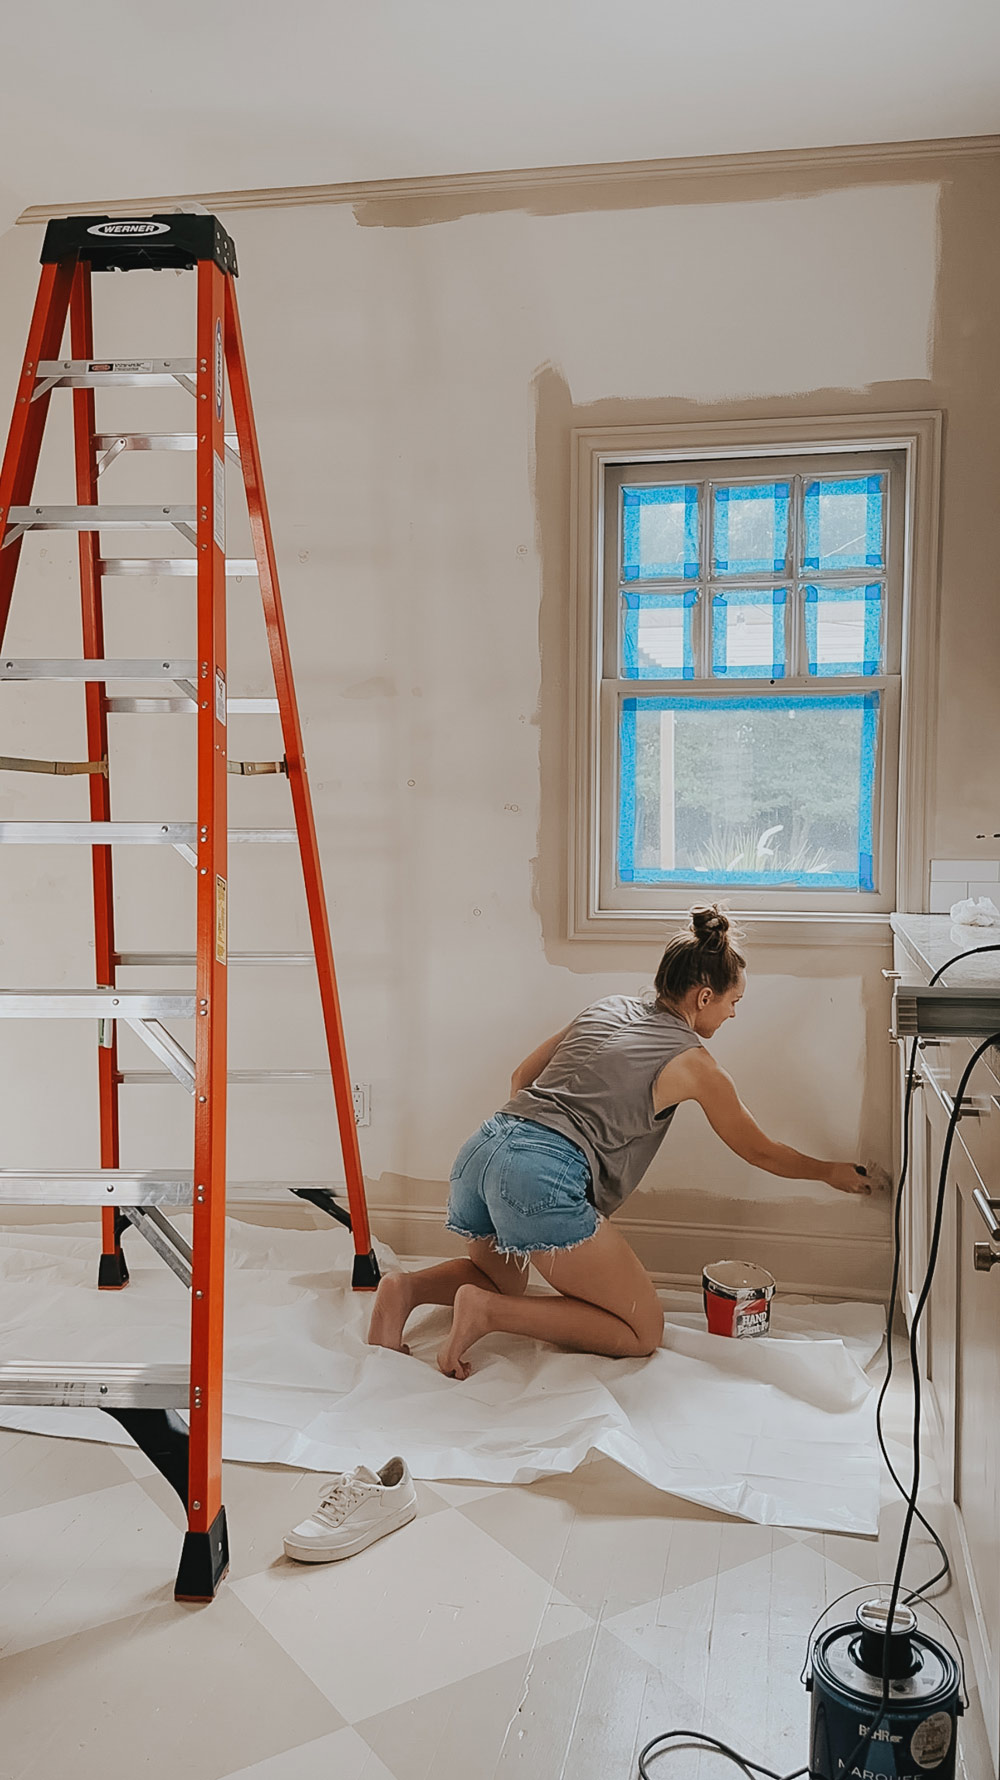 A person on the floor painting a wall next to a ladder.